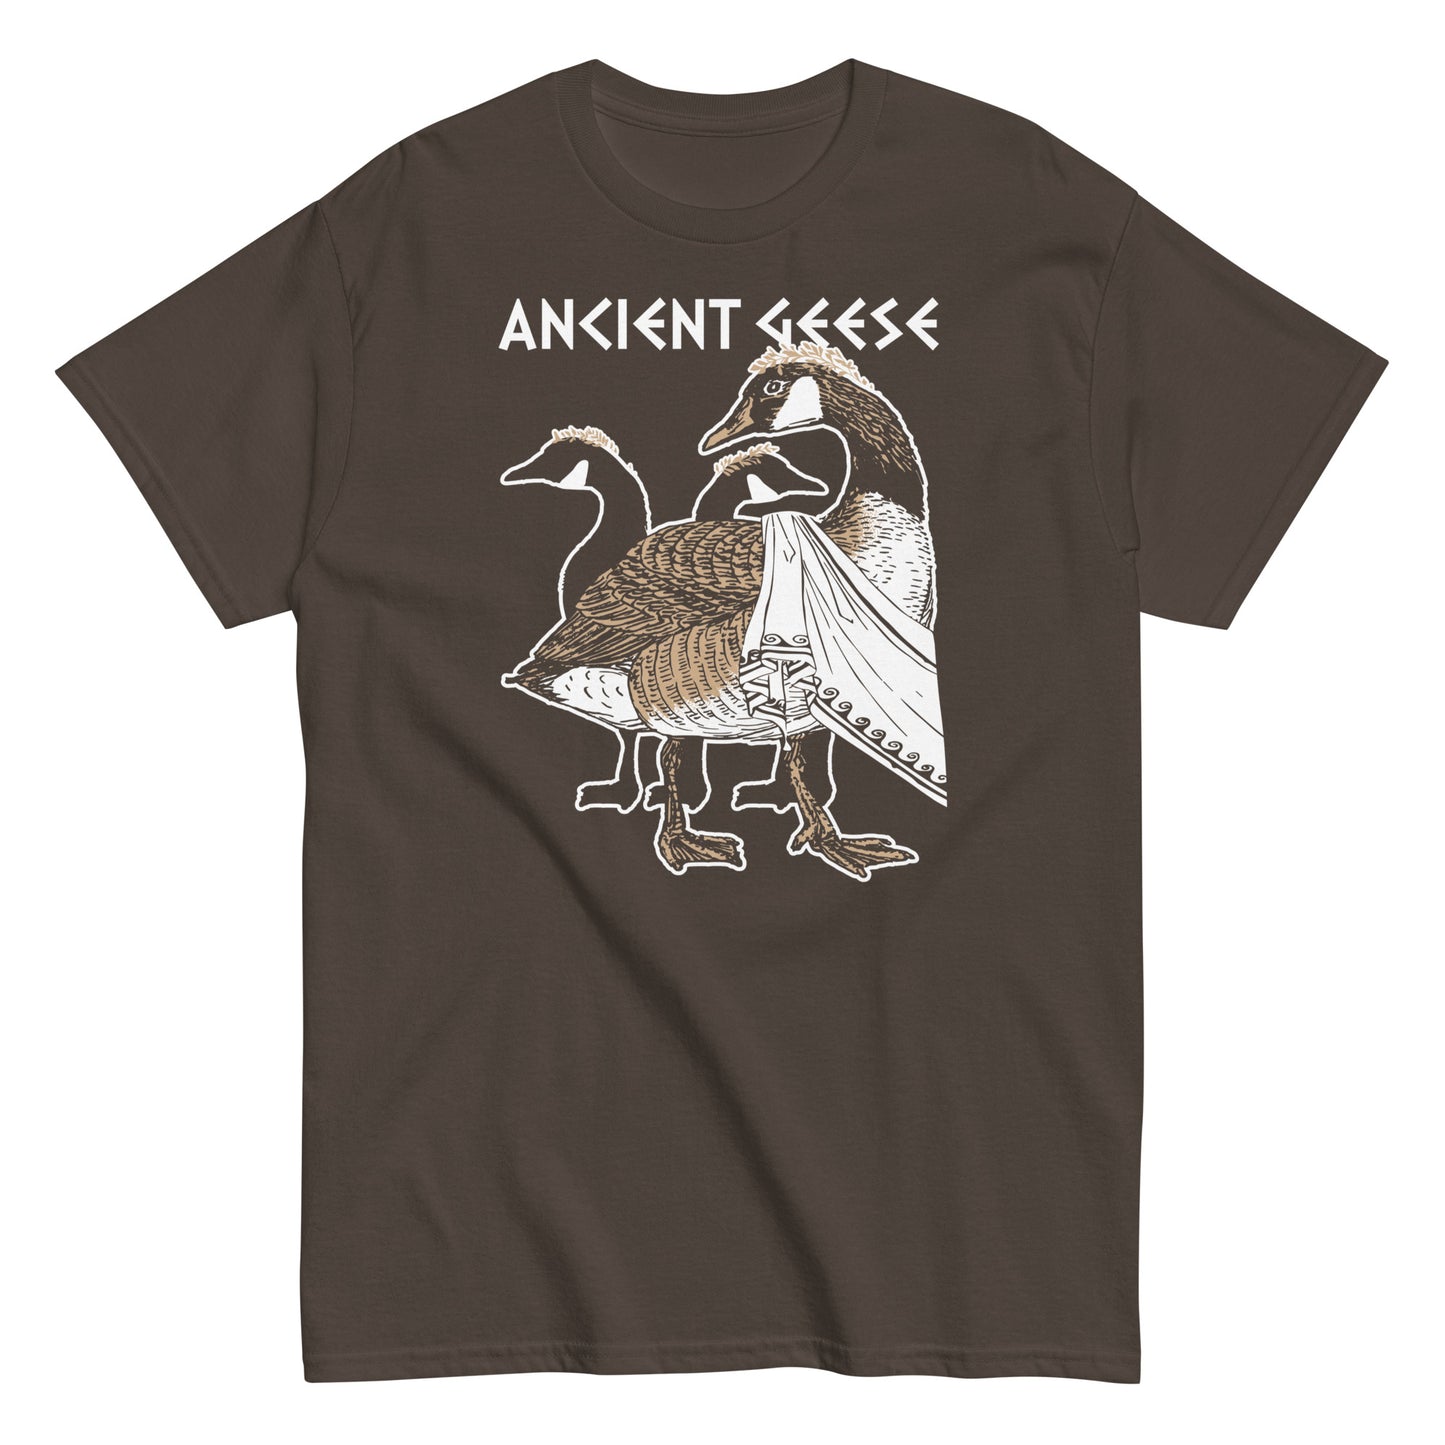 Ancient Geese Men's Classic Tee